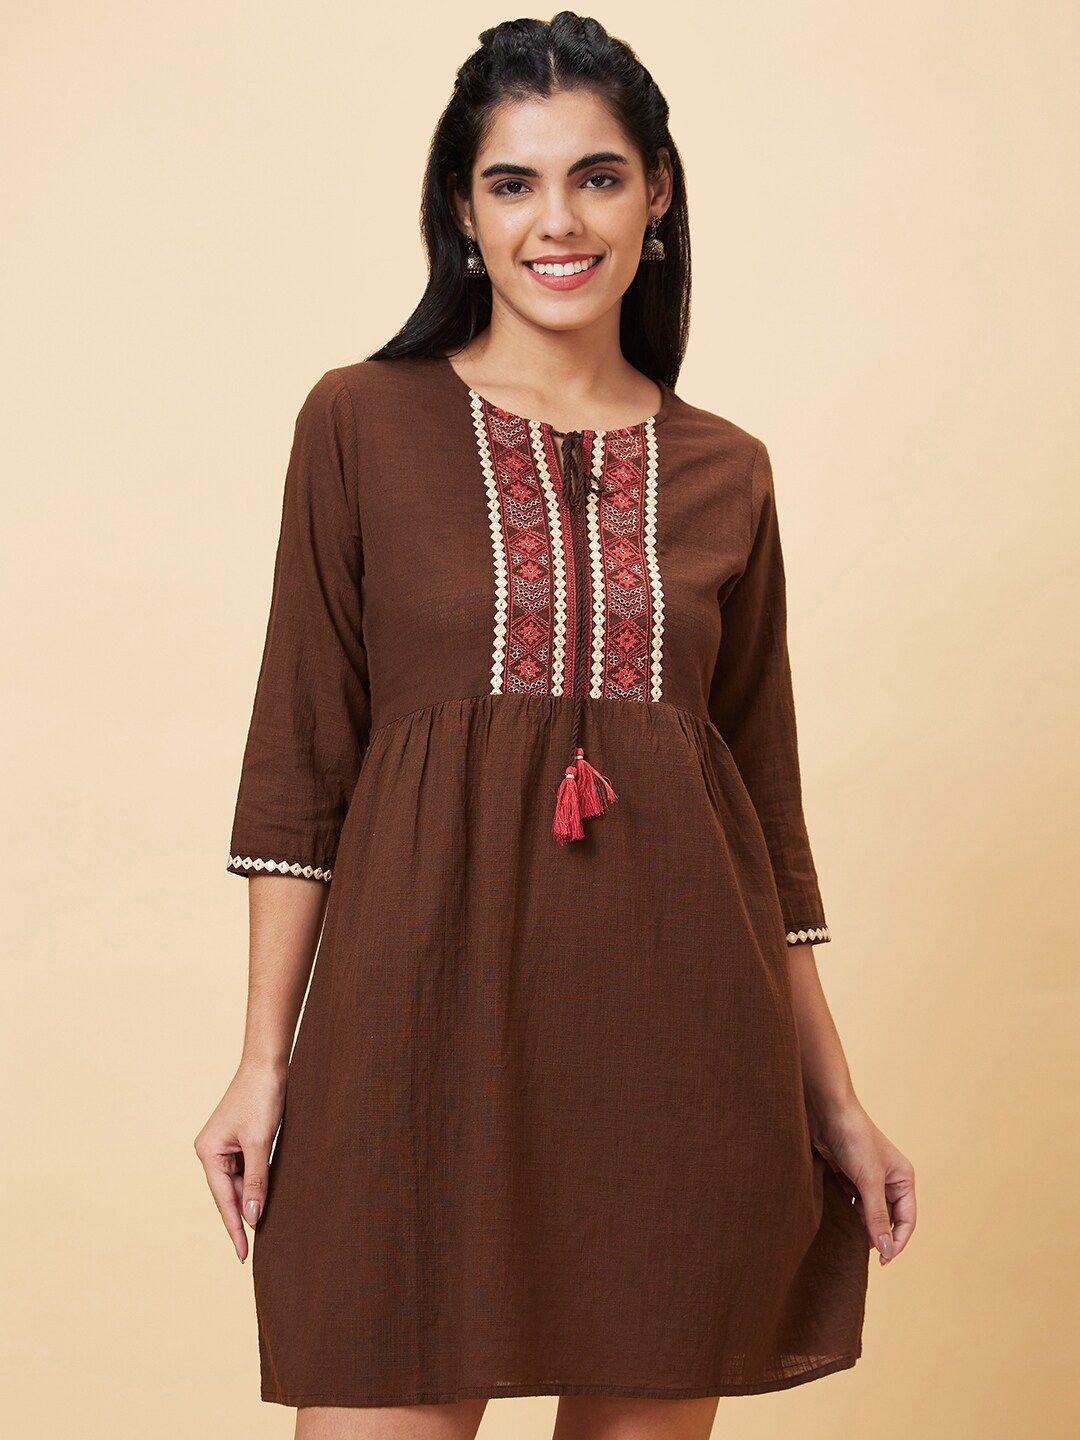 globus brown tie-up neck embroidered cotton a-line dress